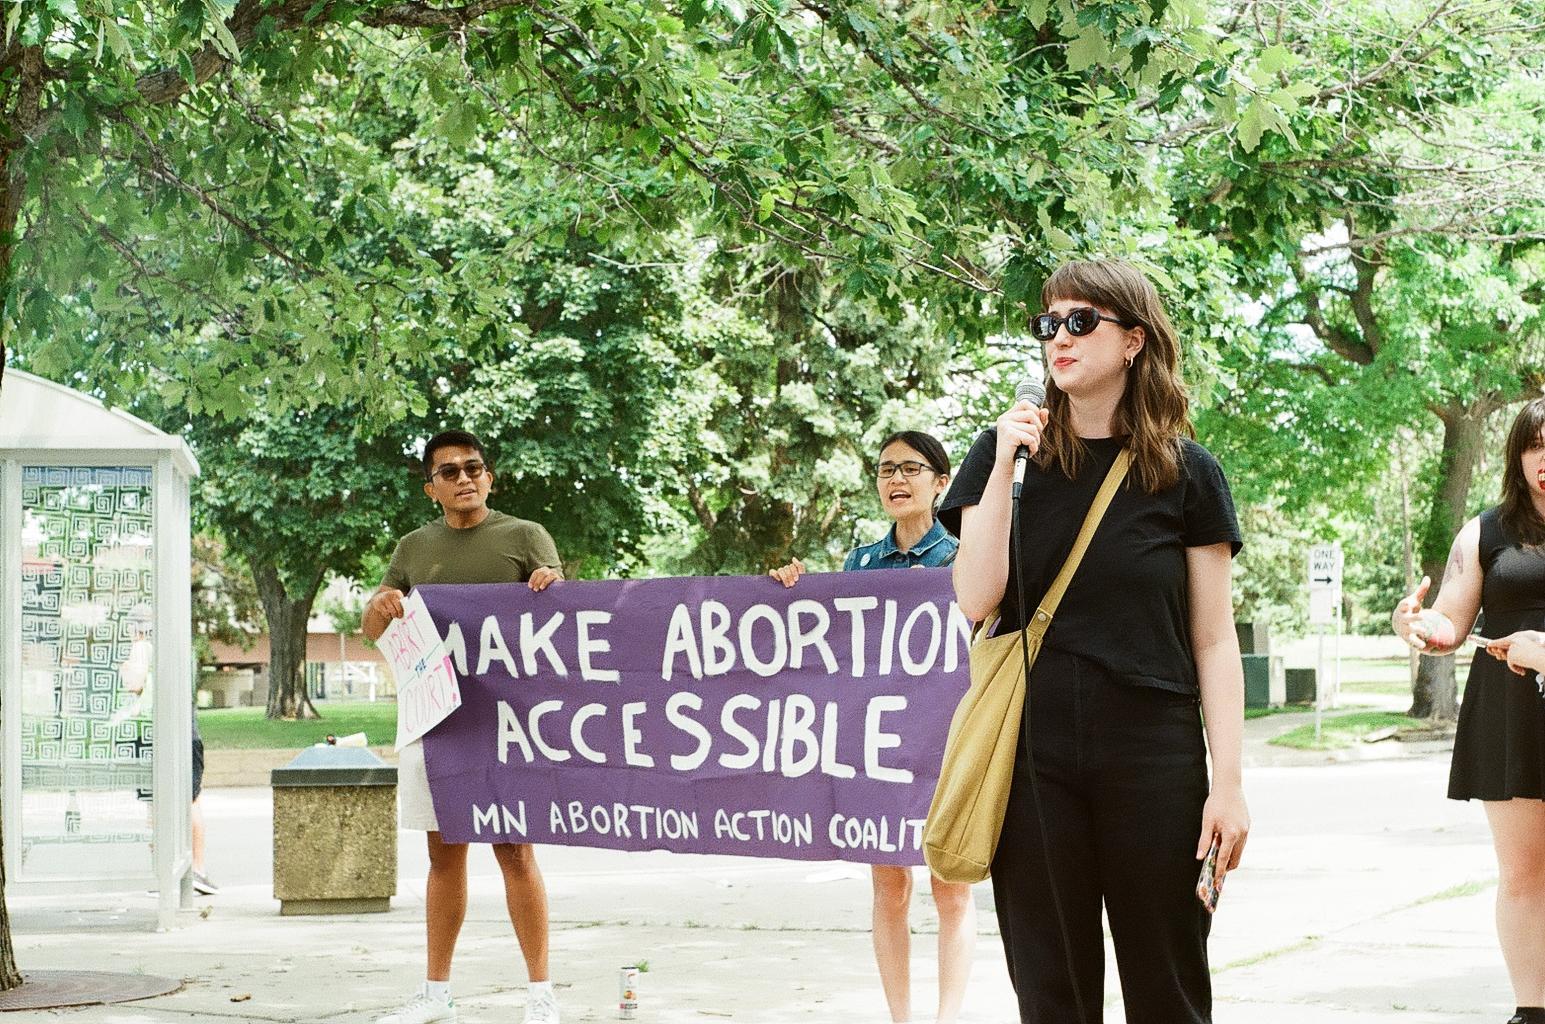 Press Release: Abortion Access Protest